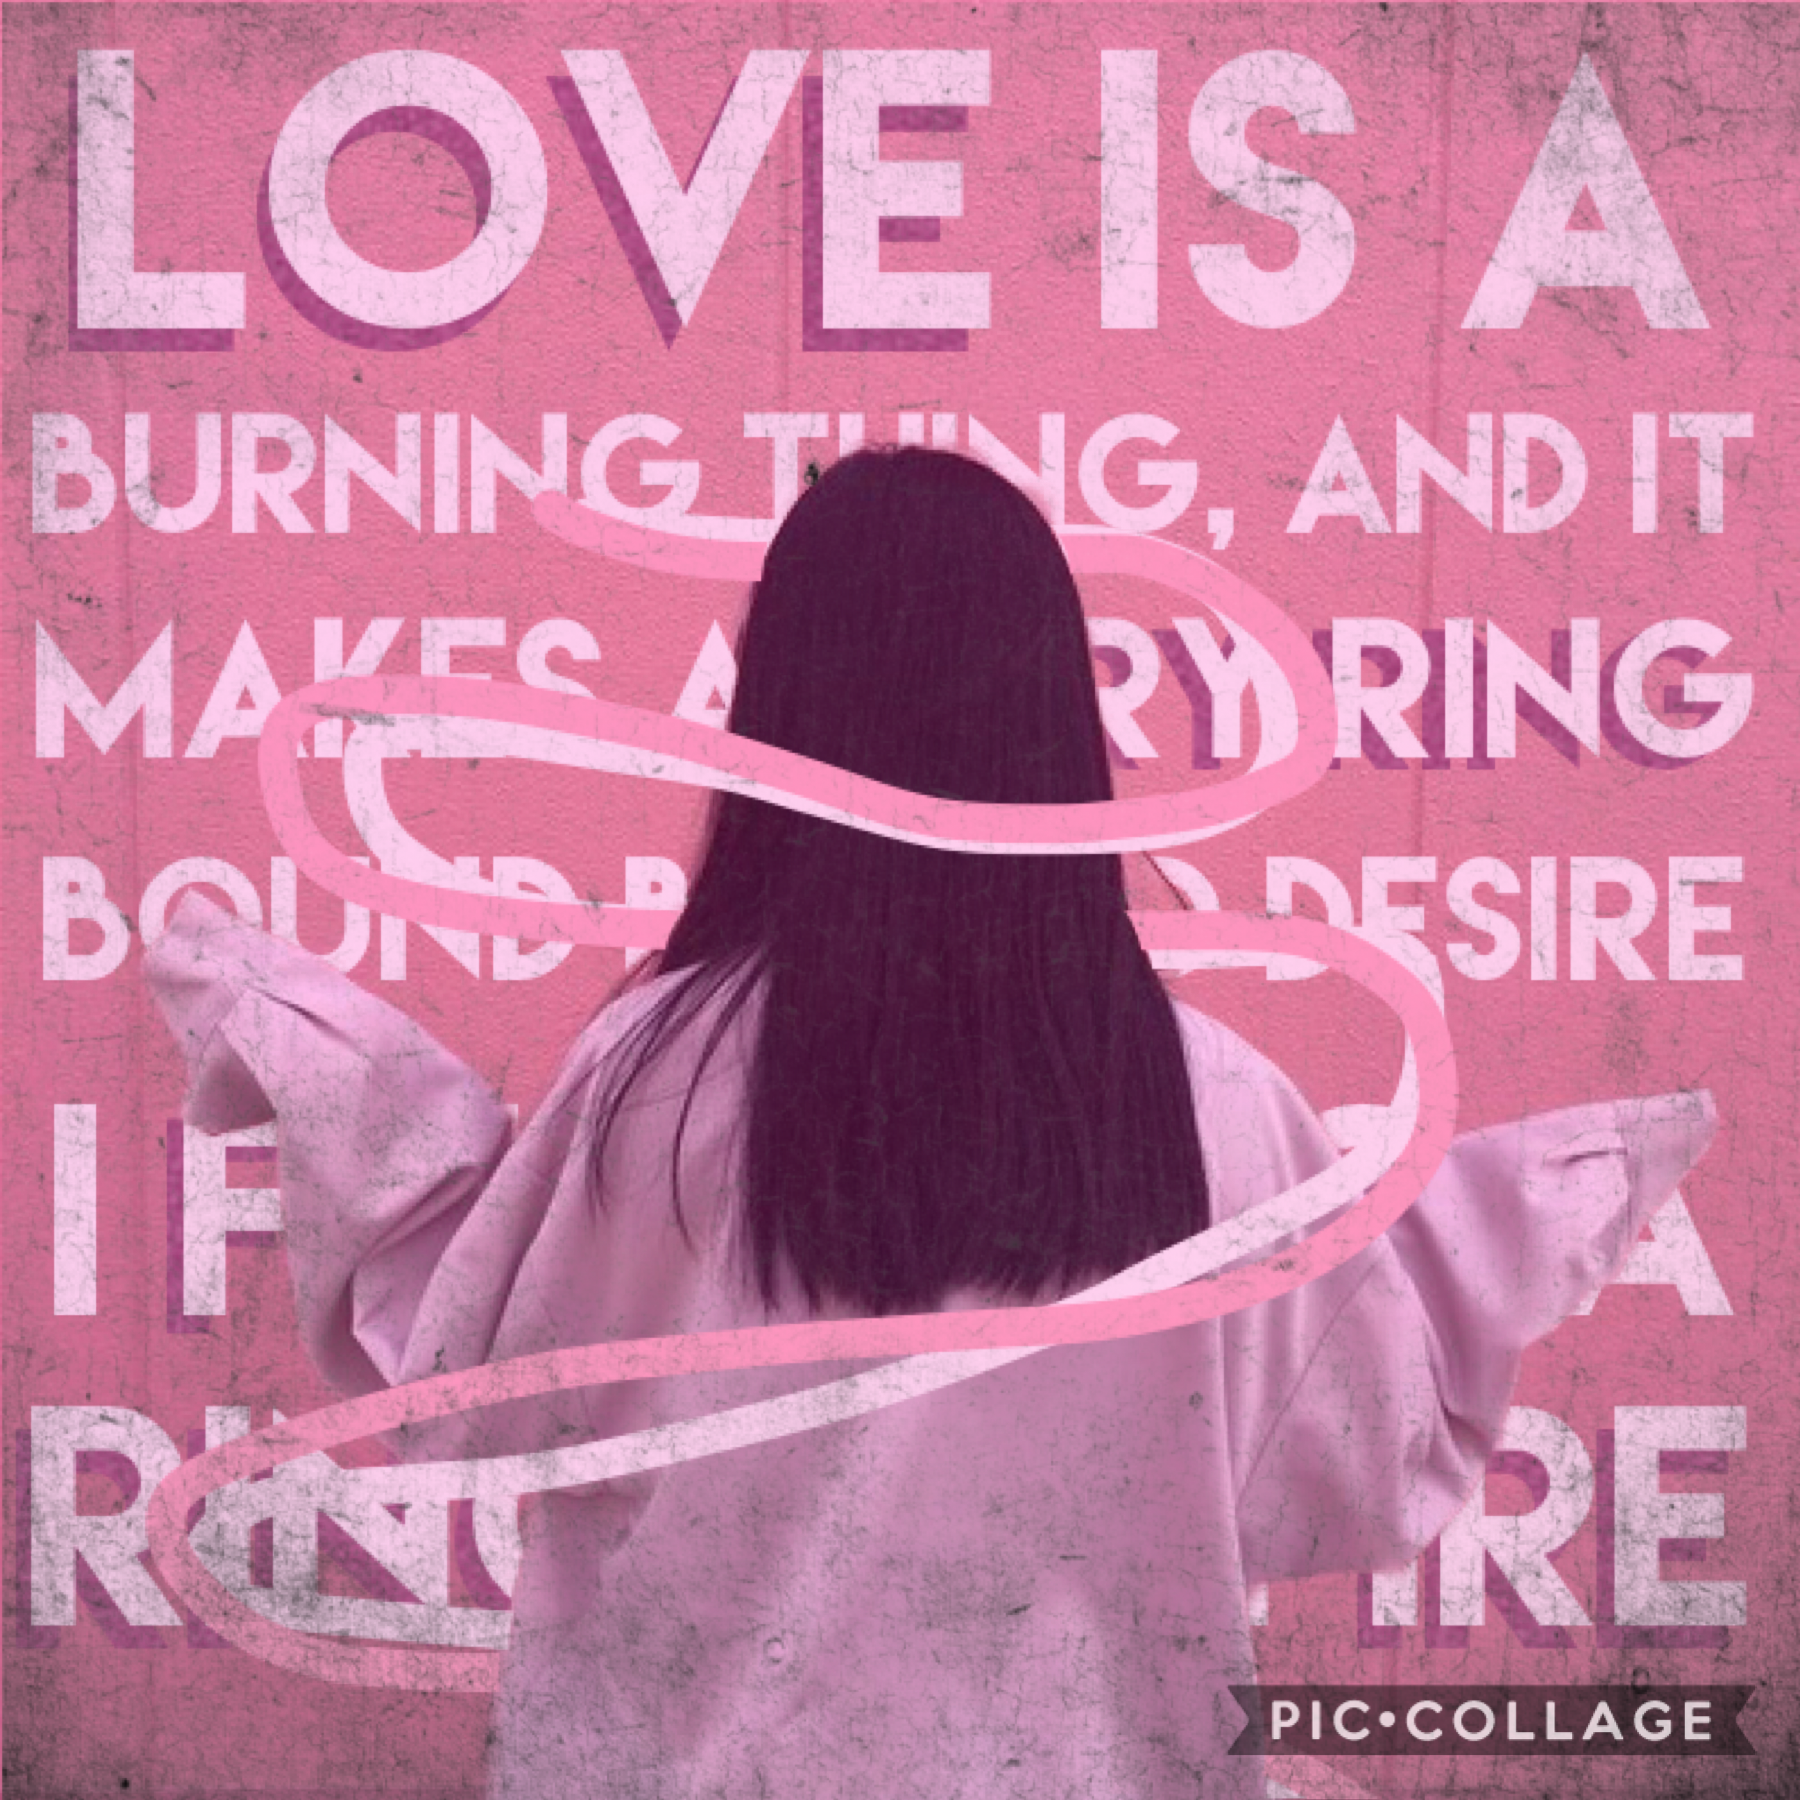 💕Ring of Fire💕
I was like “Huh, I should make a collage” and the first lyrics that popped into my head were these, so here

I don’t know if I like this or not so 🤷‍♀️🤷‍♀️